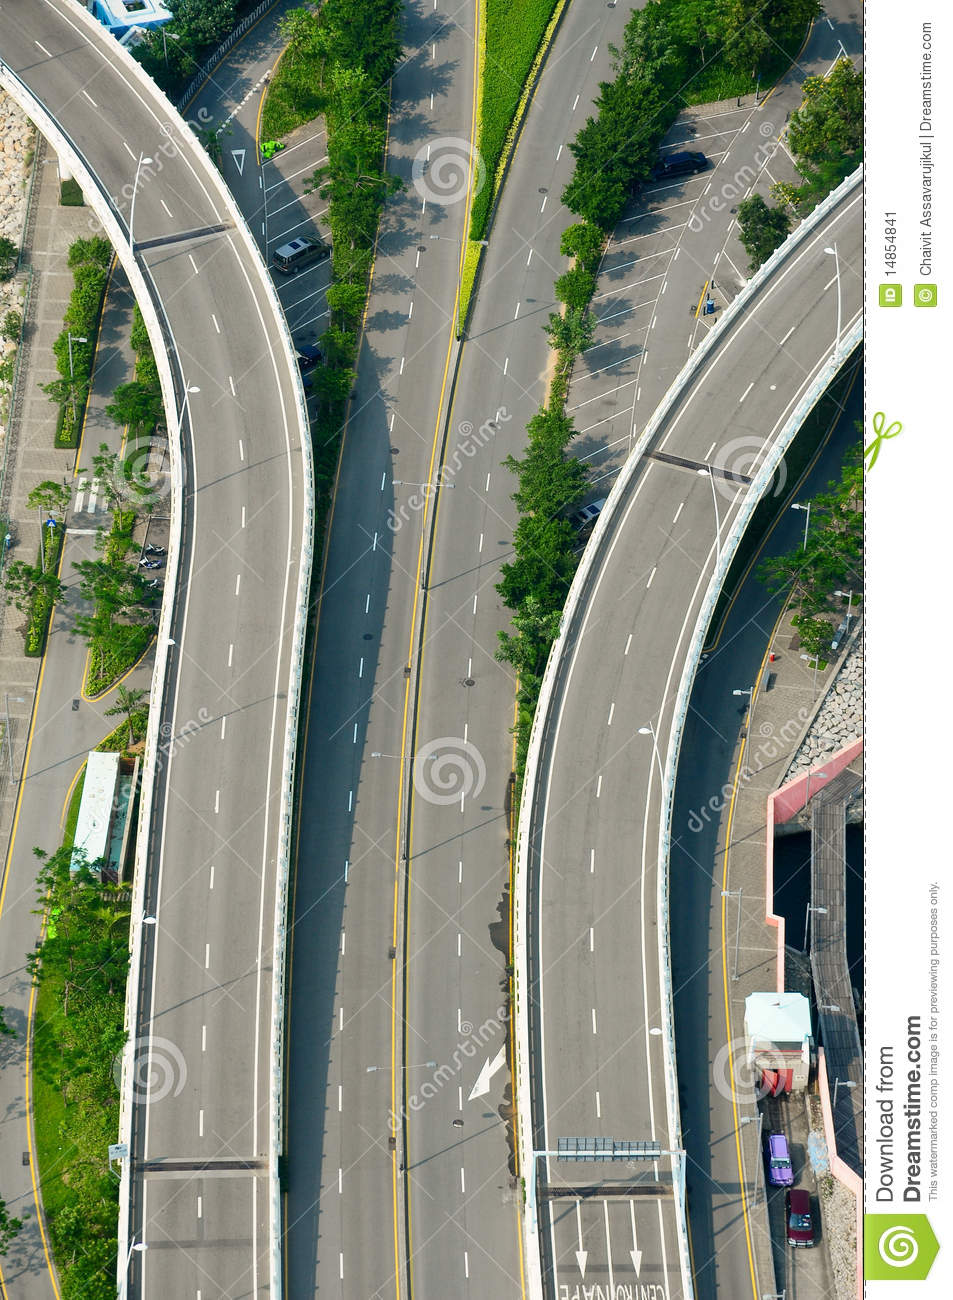 Highway Top View Stock Image   Image  14854841